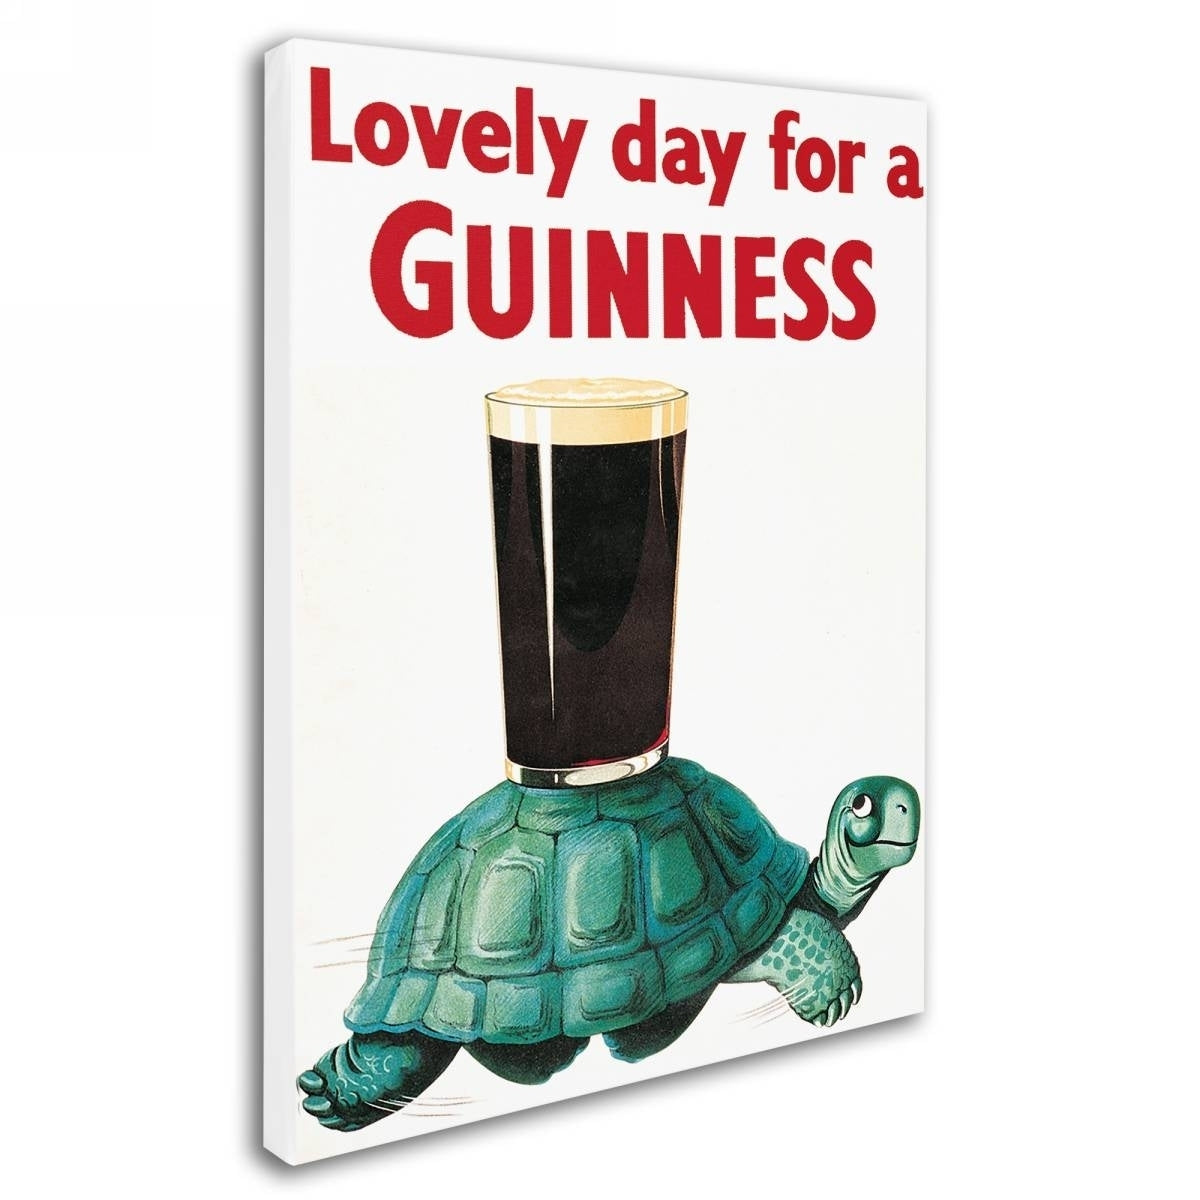 An art piece featuring a turtle holding a glass of Guinness Brewery 'Lovely Day For A Guinness X' Canvas Art, one of the most iconic beer brands.